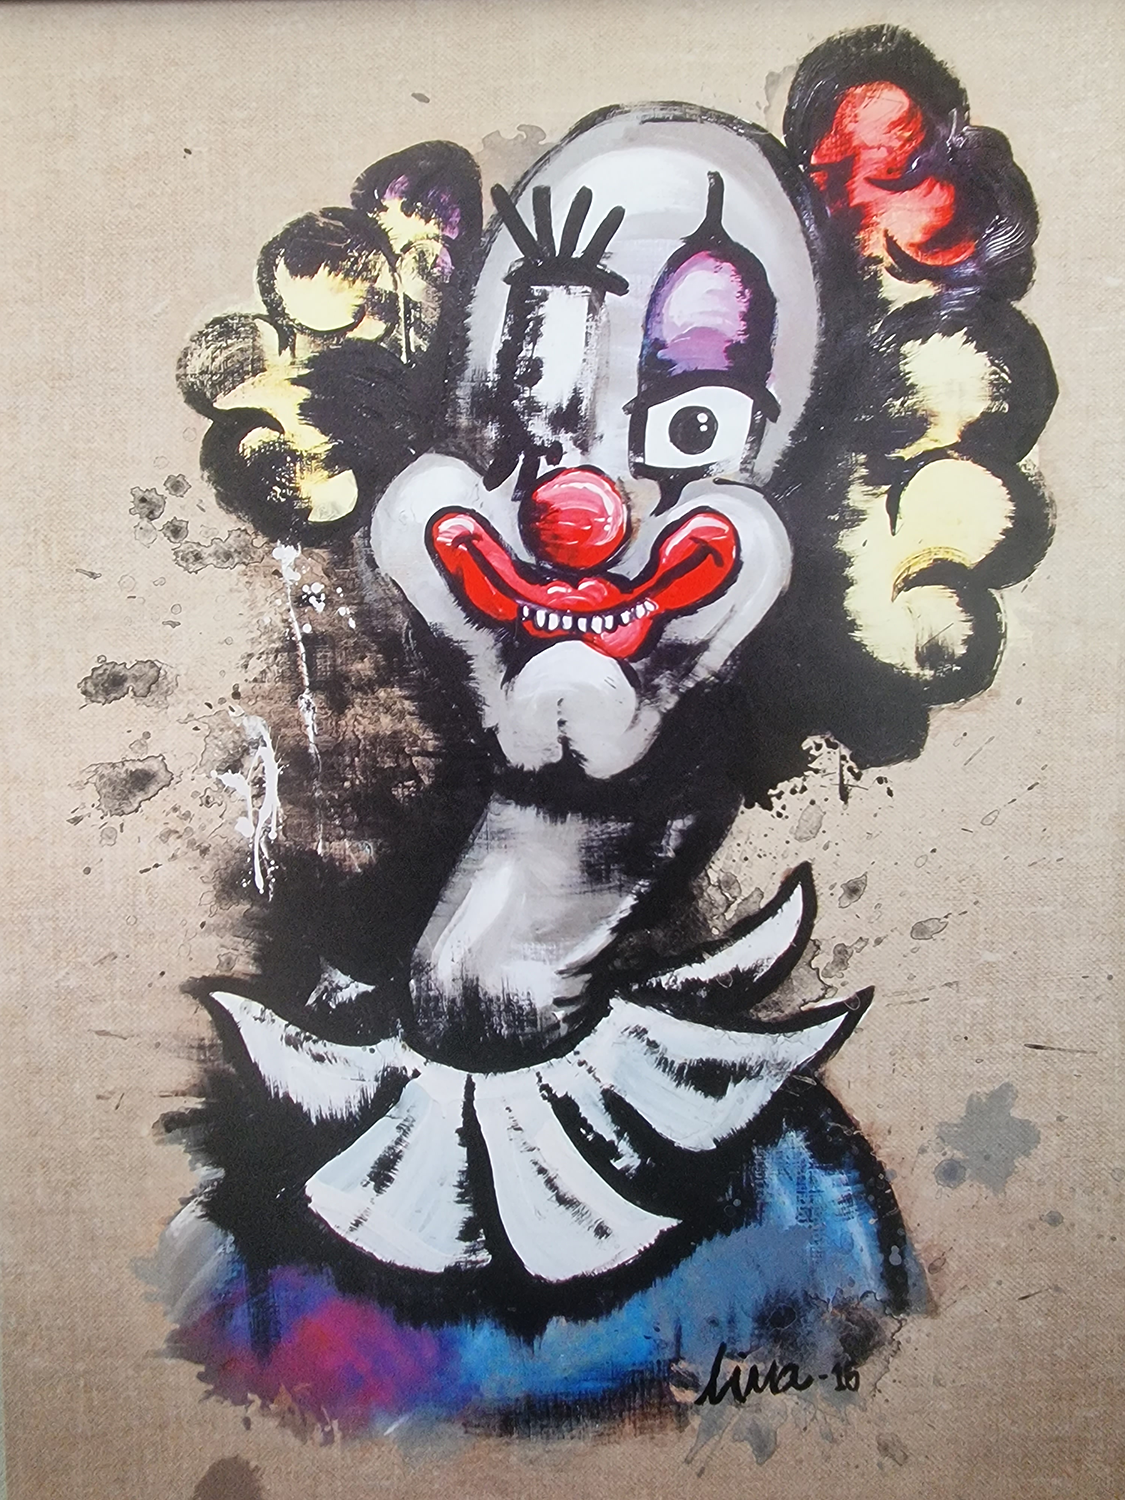 Clarence the Clown